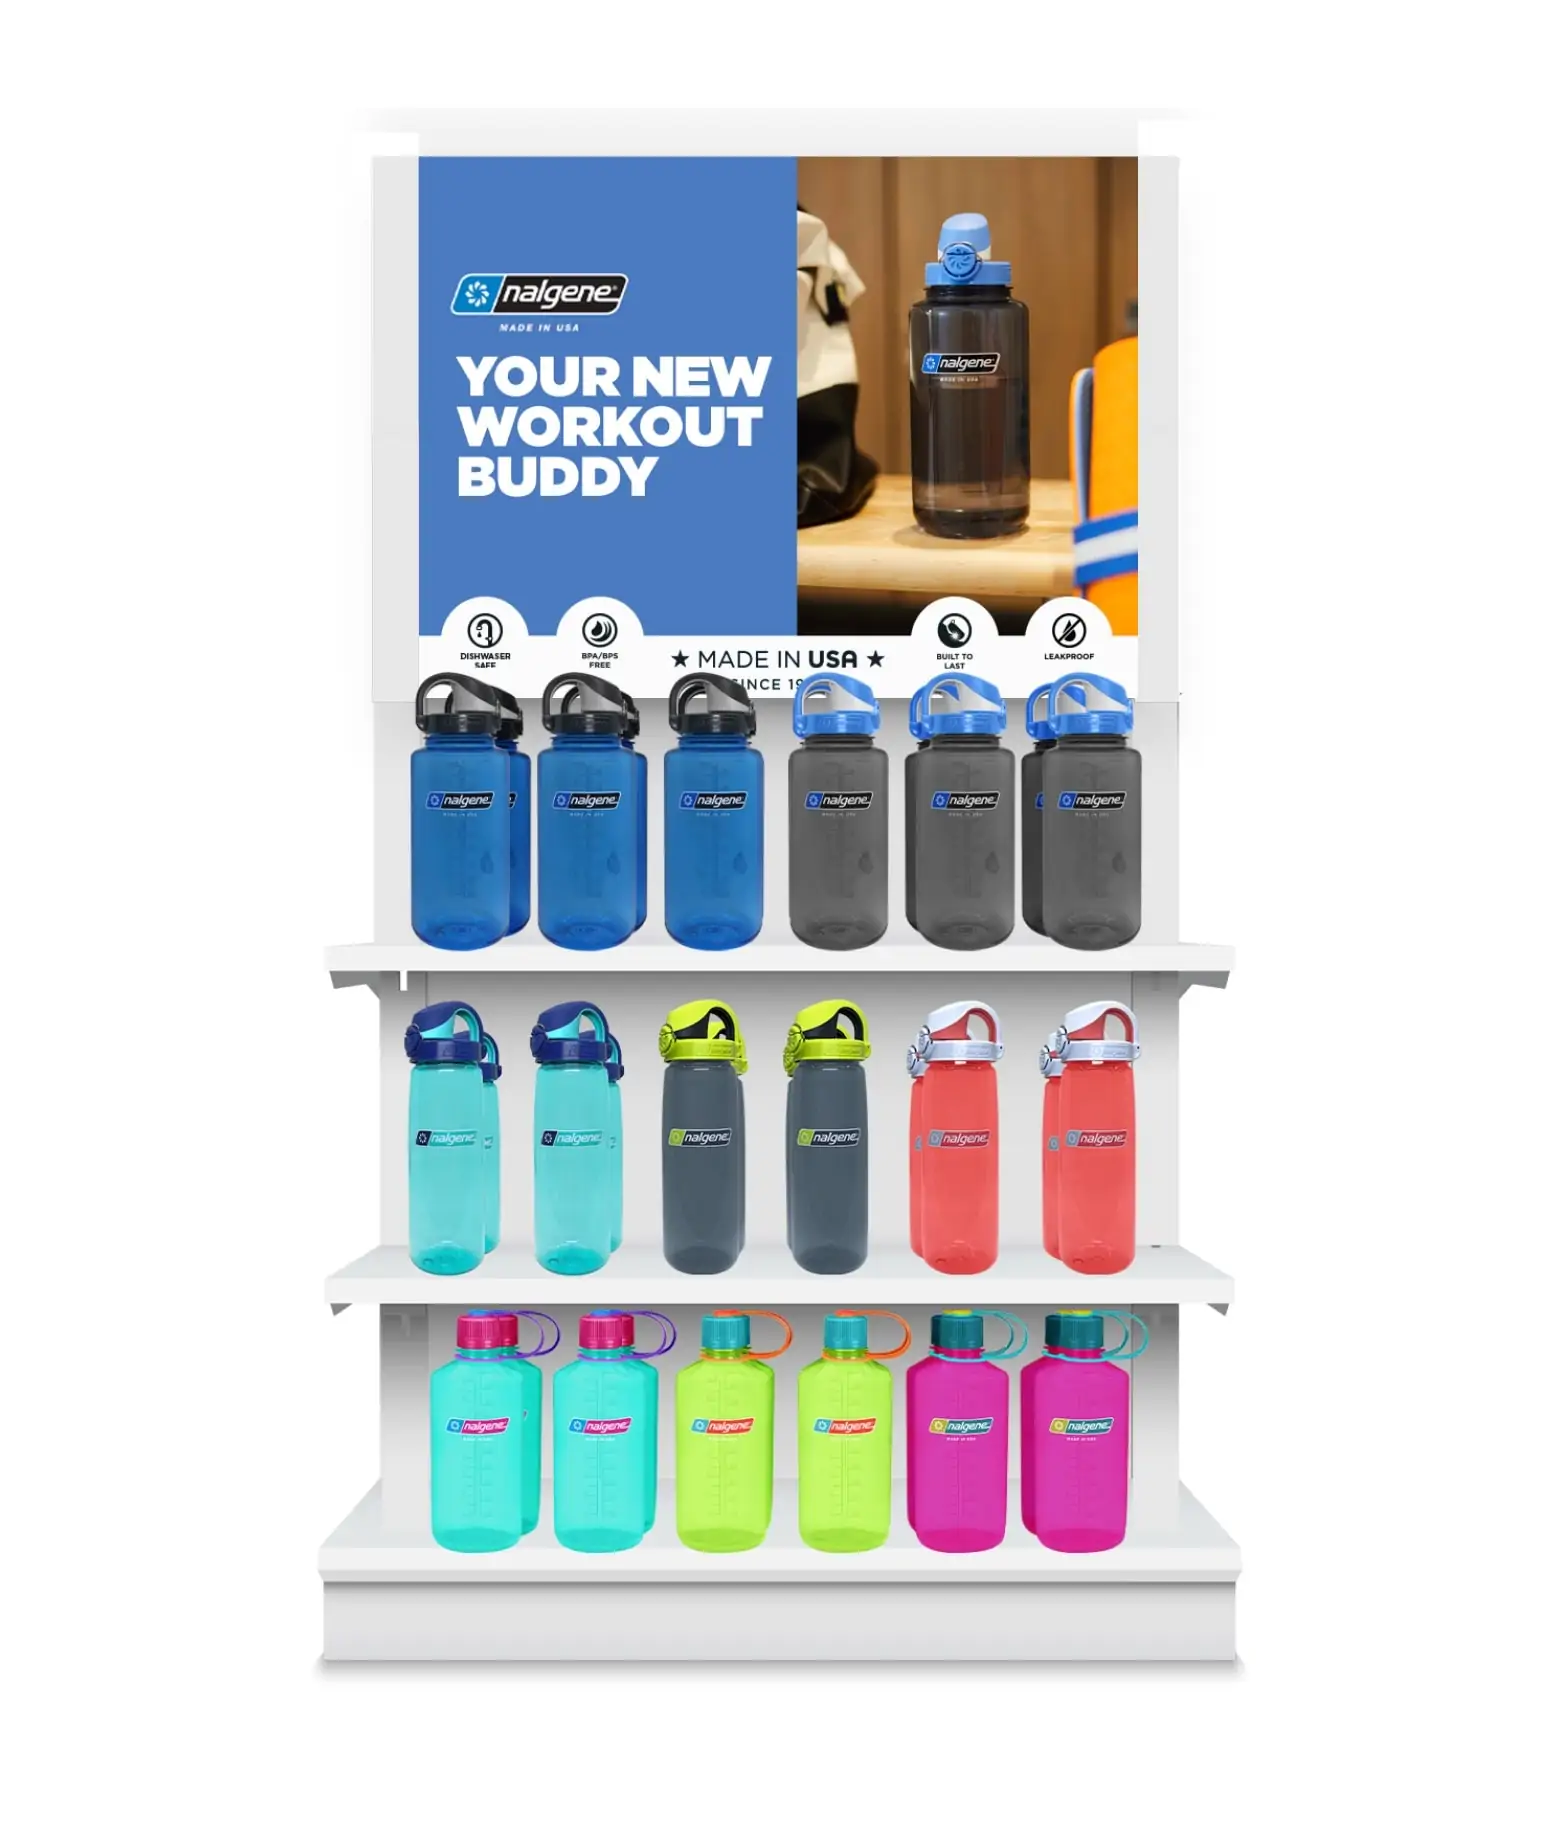 image of a nalgene water bottle display "Your new Workout buddy" with 3 rows of various nalgene water bottles